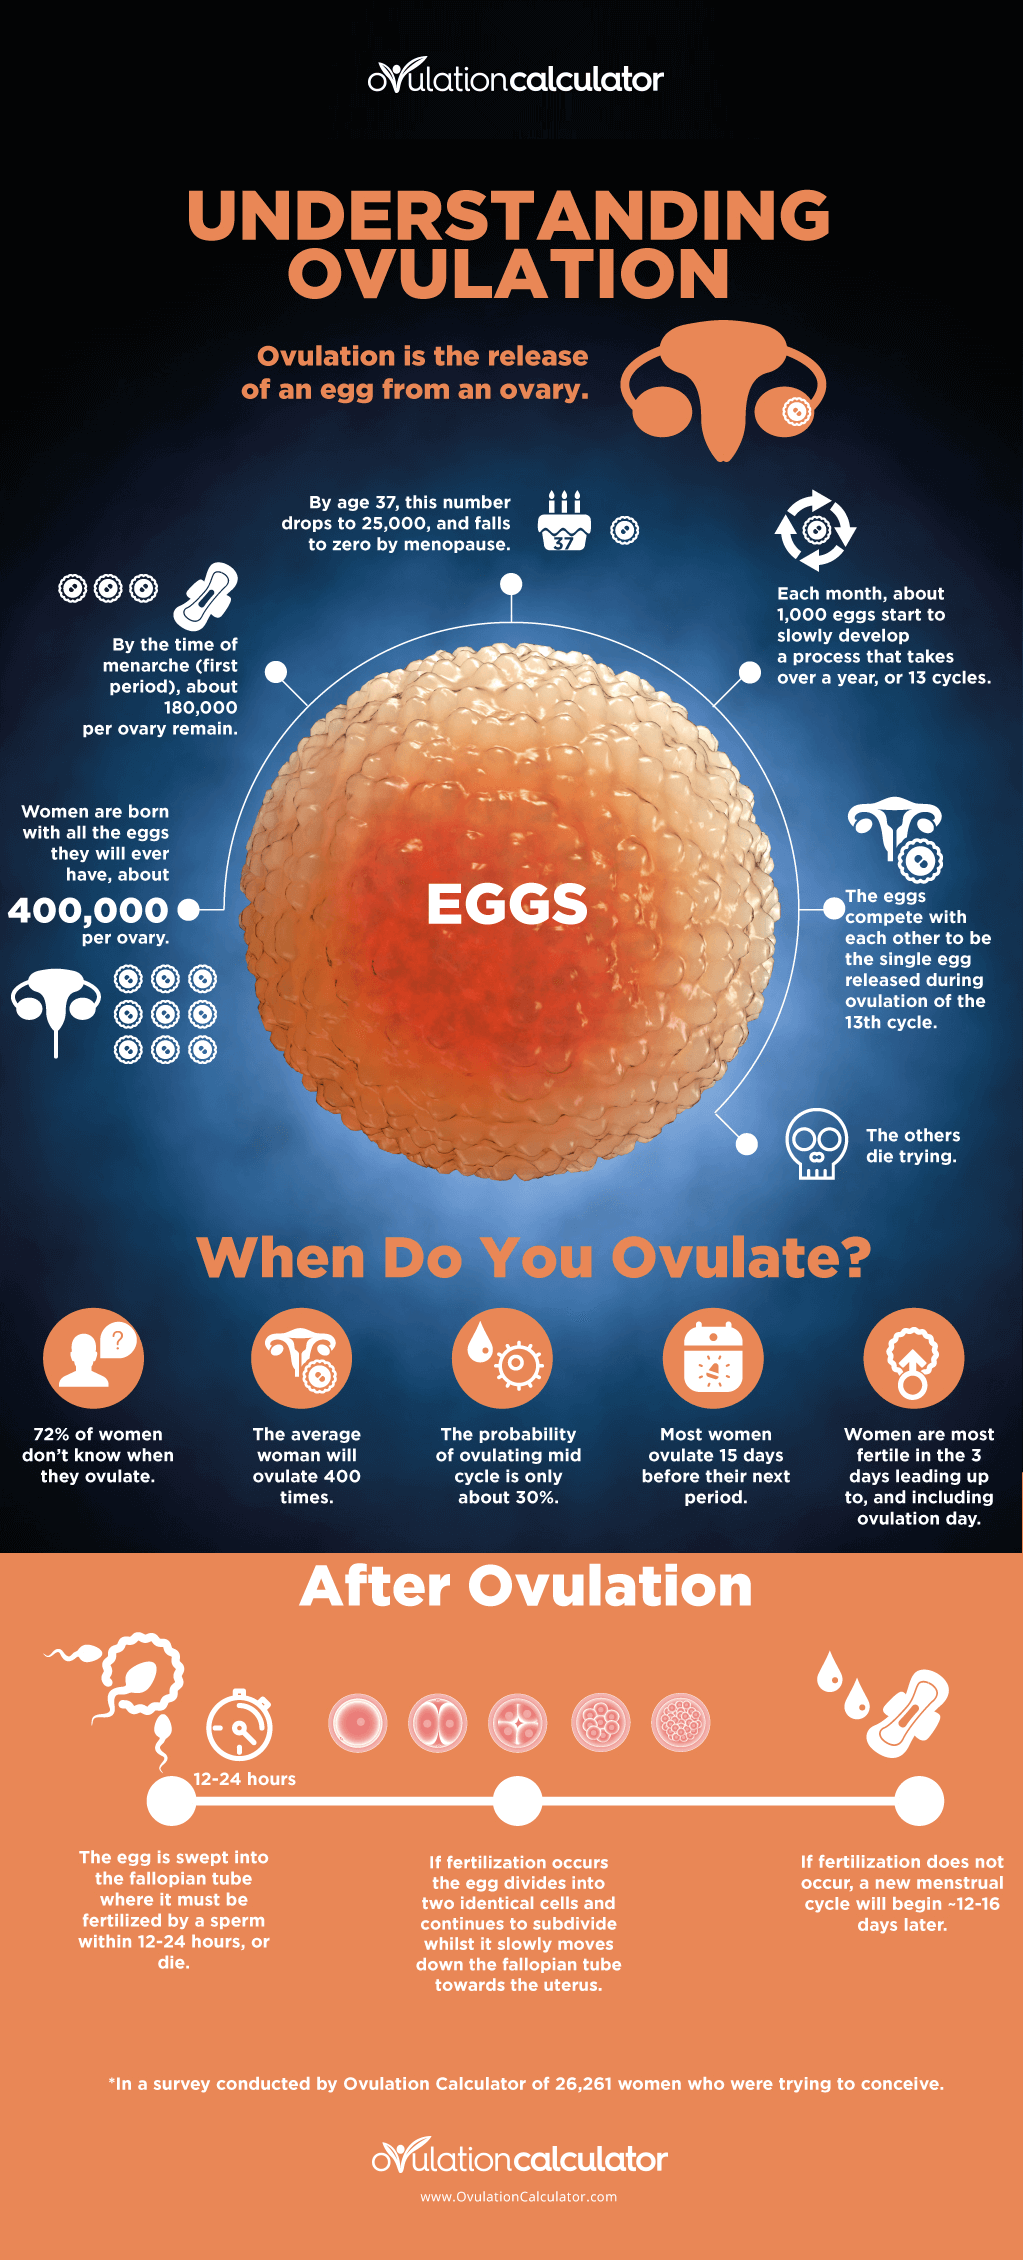 How To Know If You Are Ovulating Late? A Simple Guide For Women - Inito